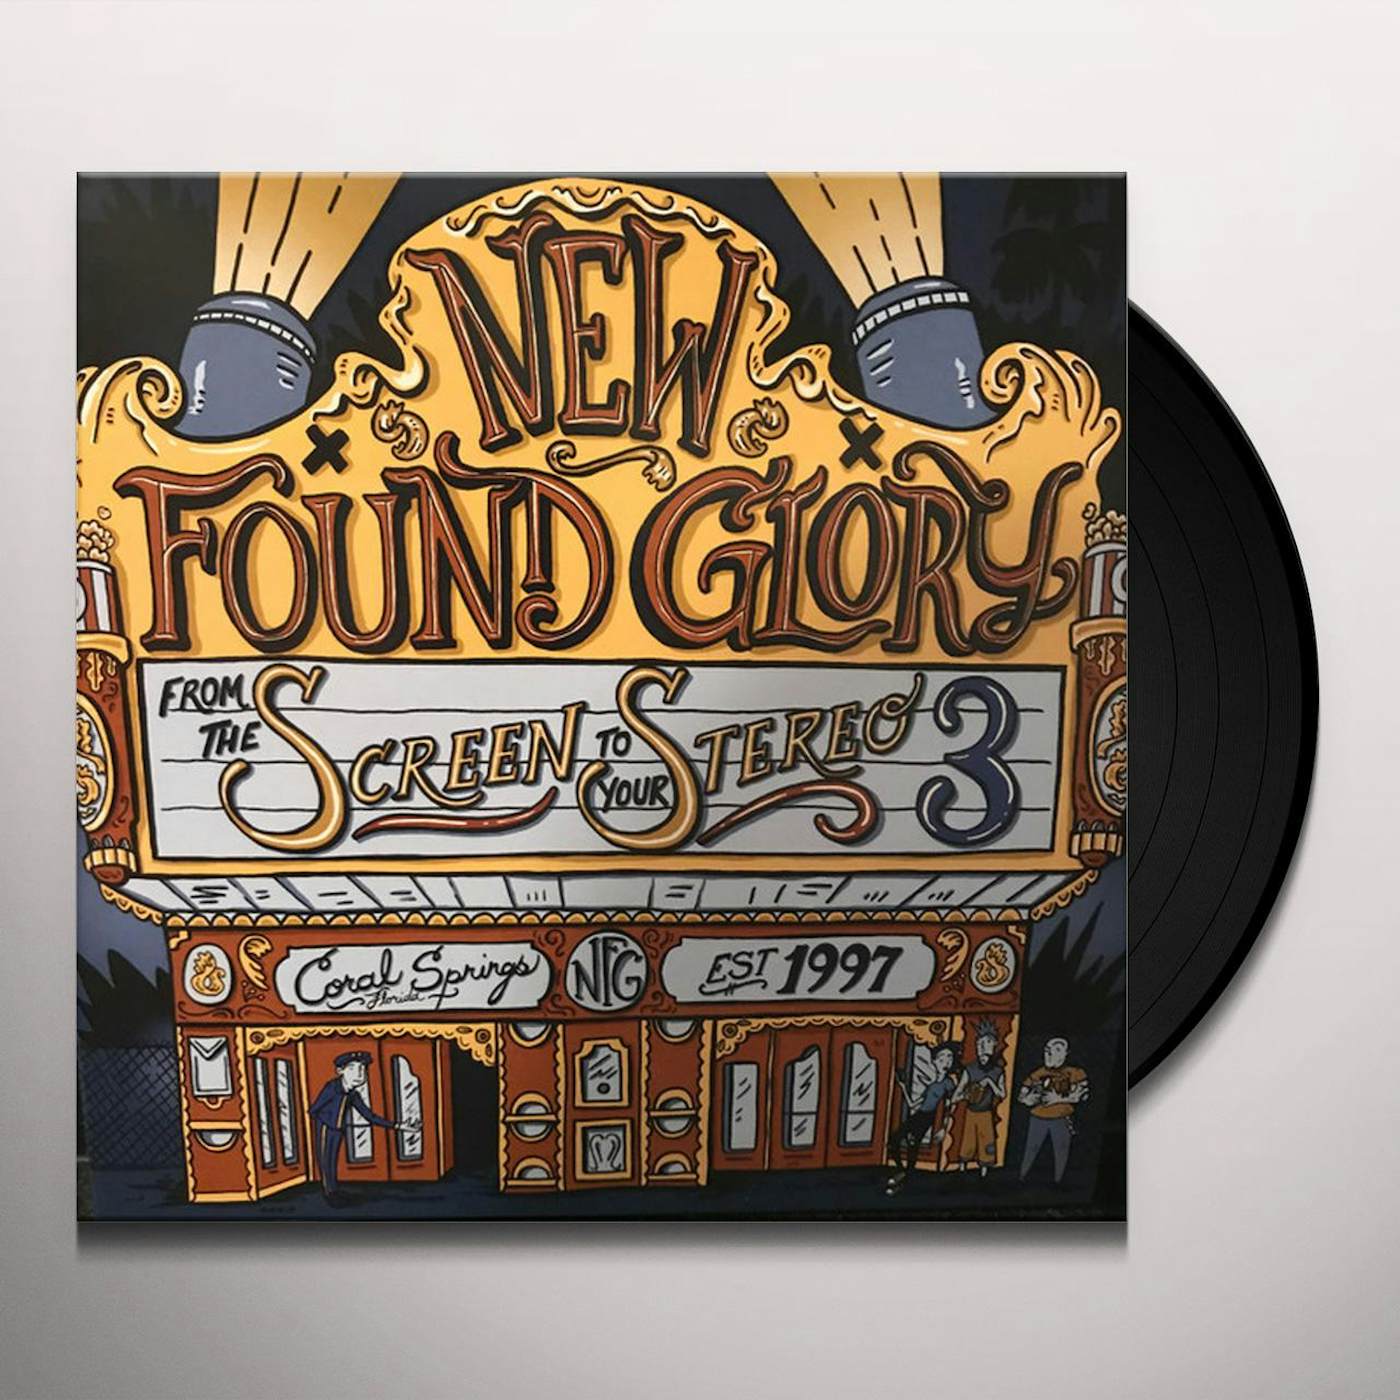 New Found Glory FROM THE SCREEN TO YOUR STEREO 3 Vinyl Record